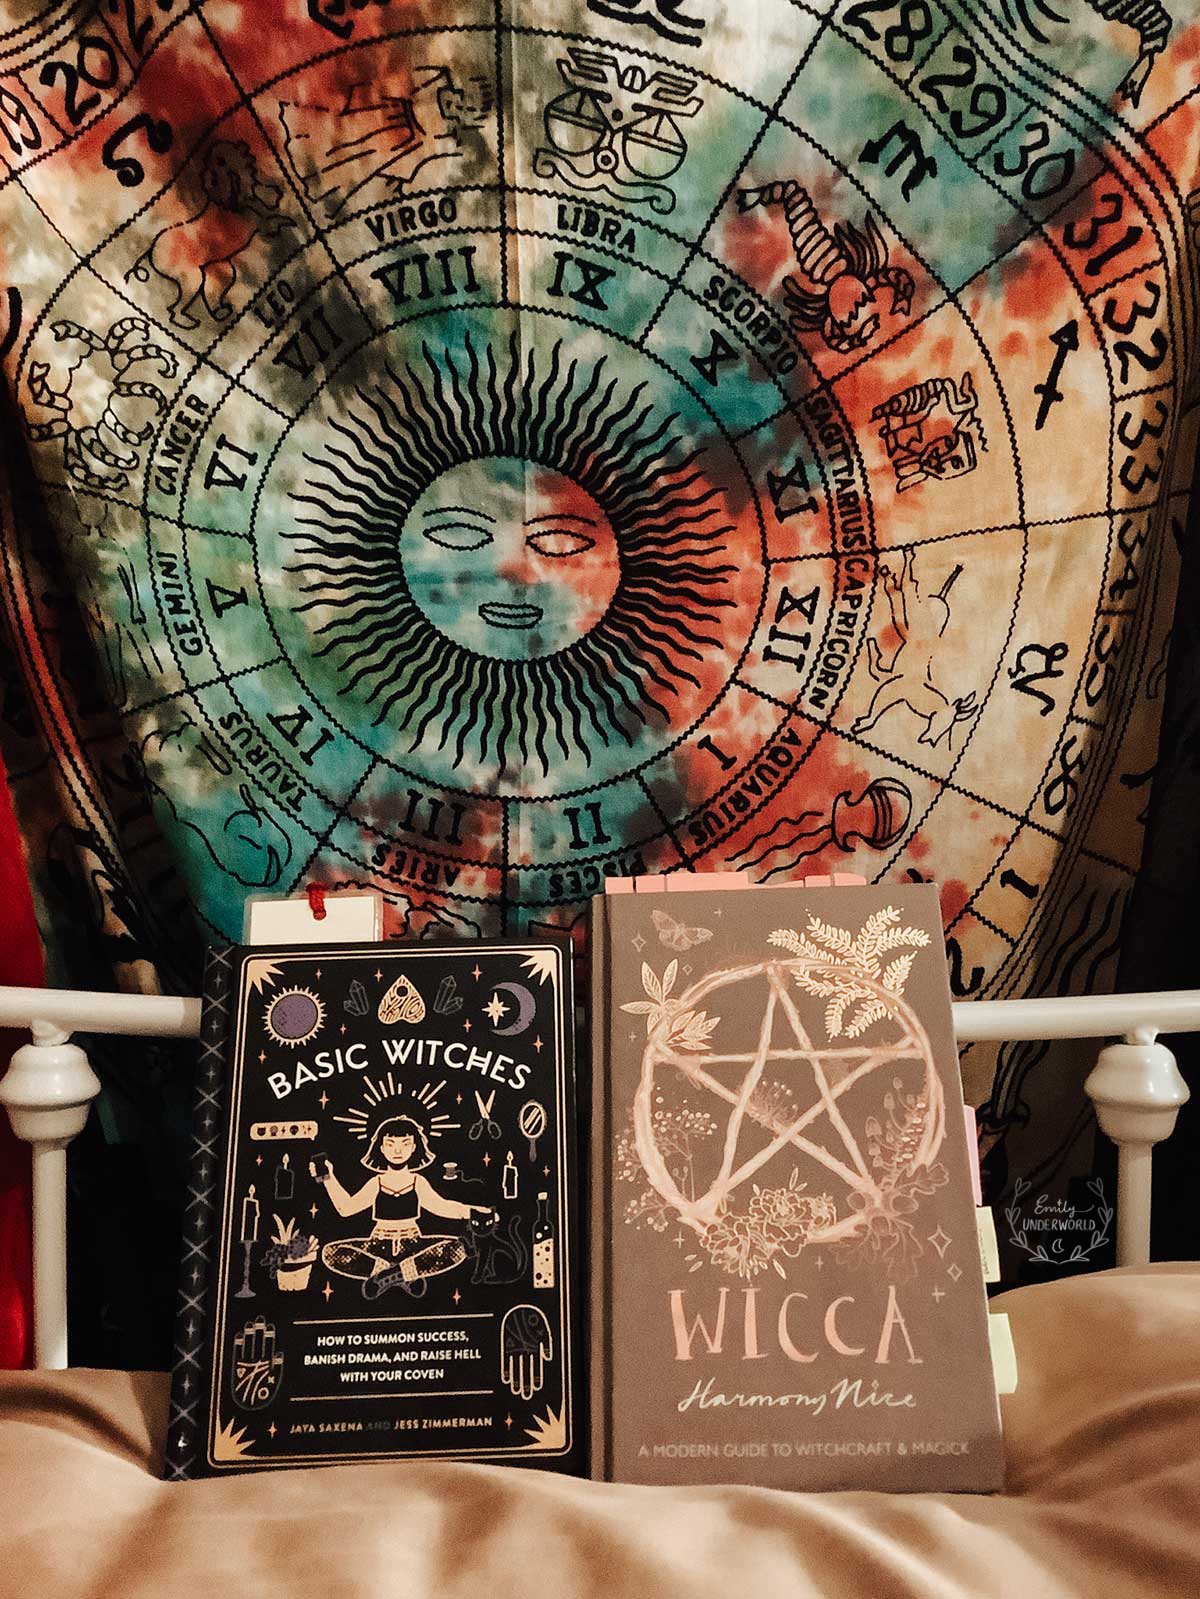 Witchcraft Books I Don't Recommend.